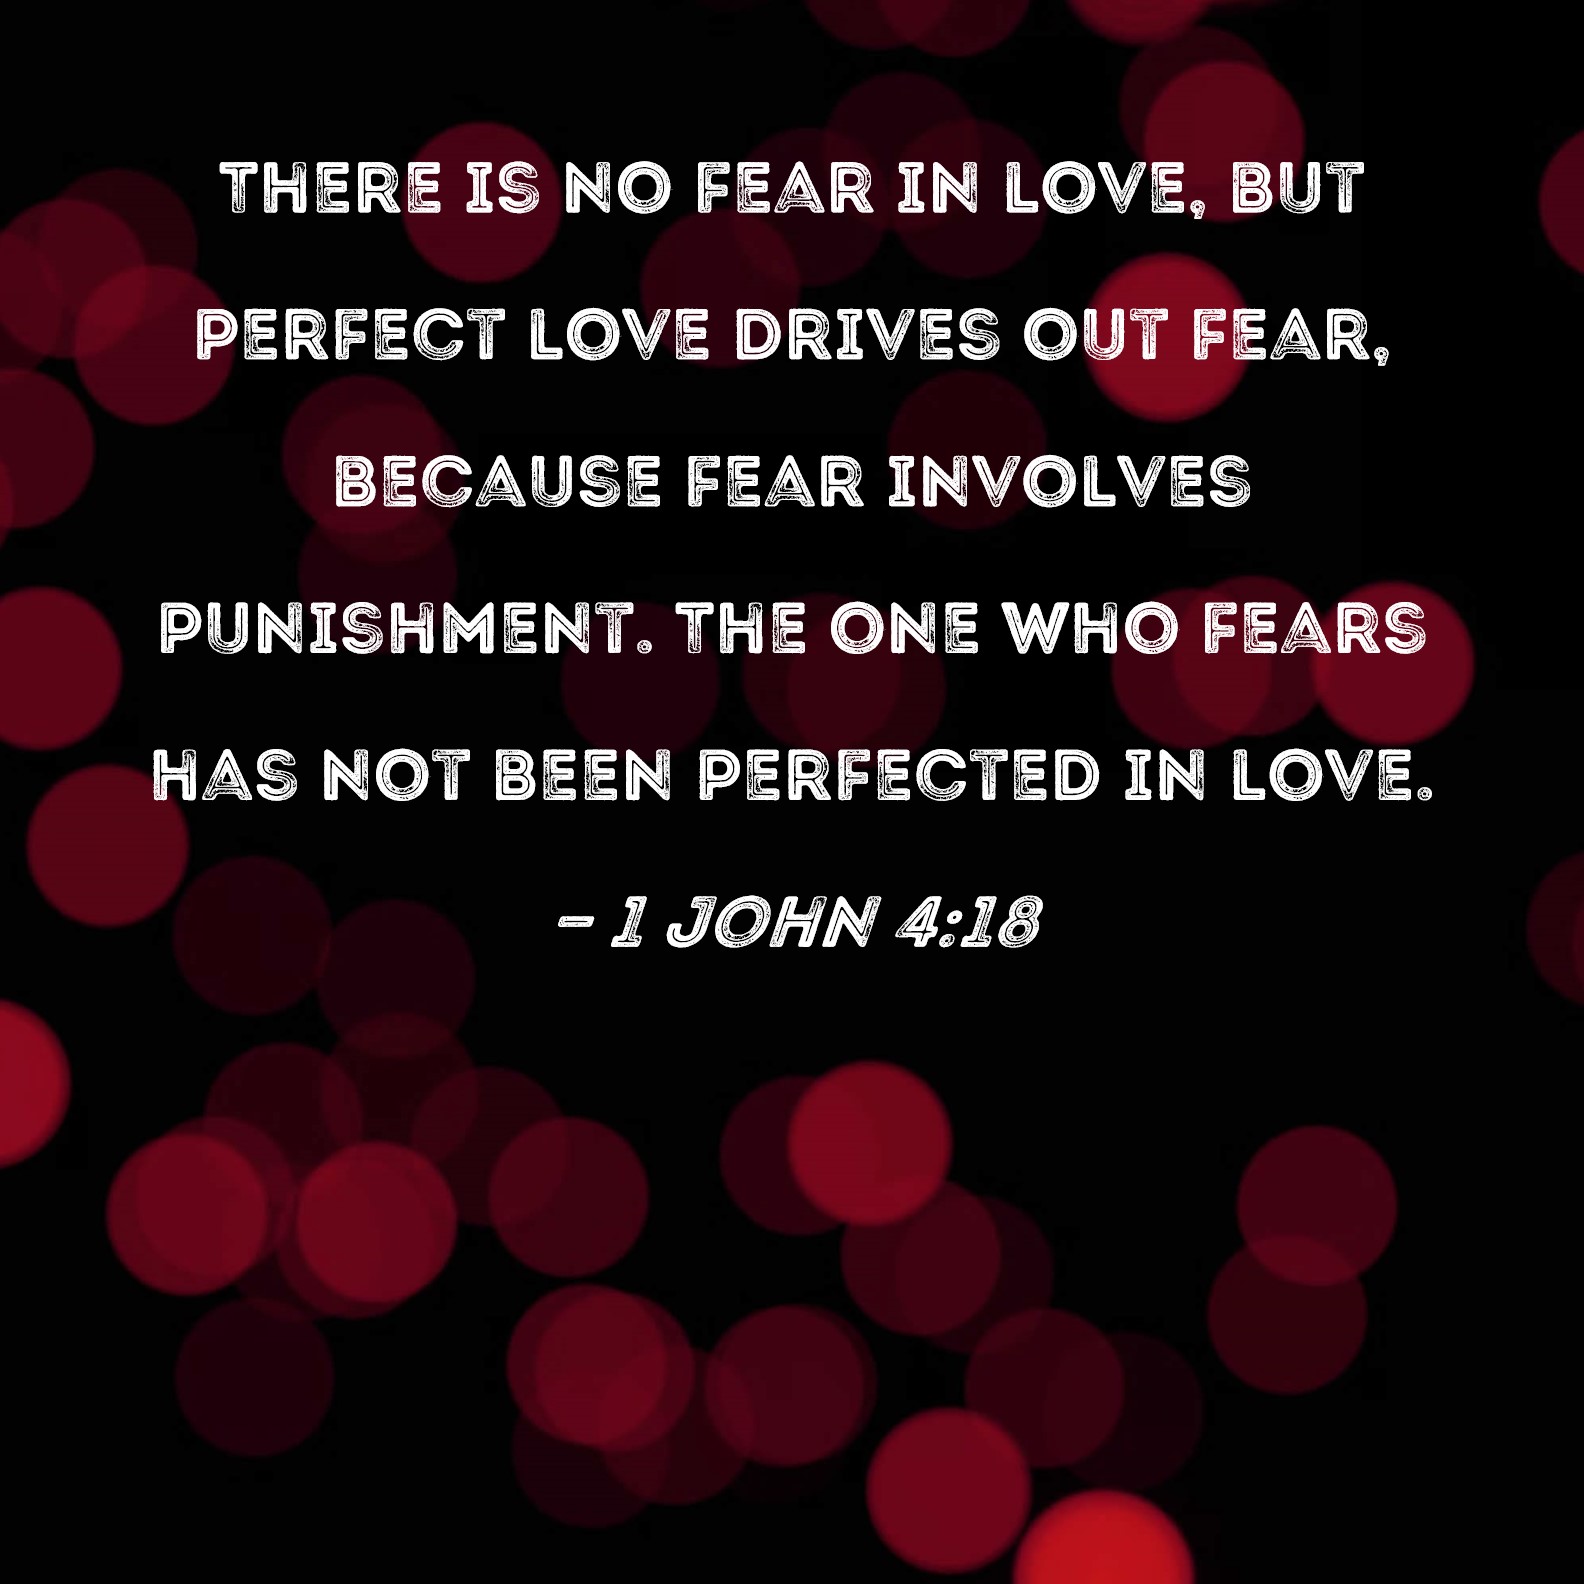 1 John 4:18 There is no fear in love, but perfect love drives out fear,  because fear involves punishment. The one who fears has not been perfected  in love.